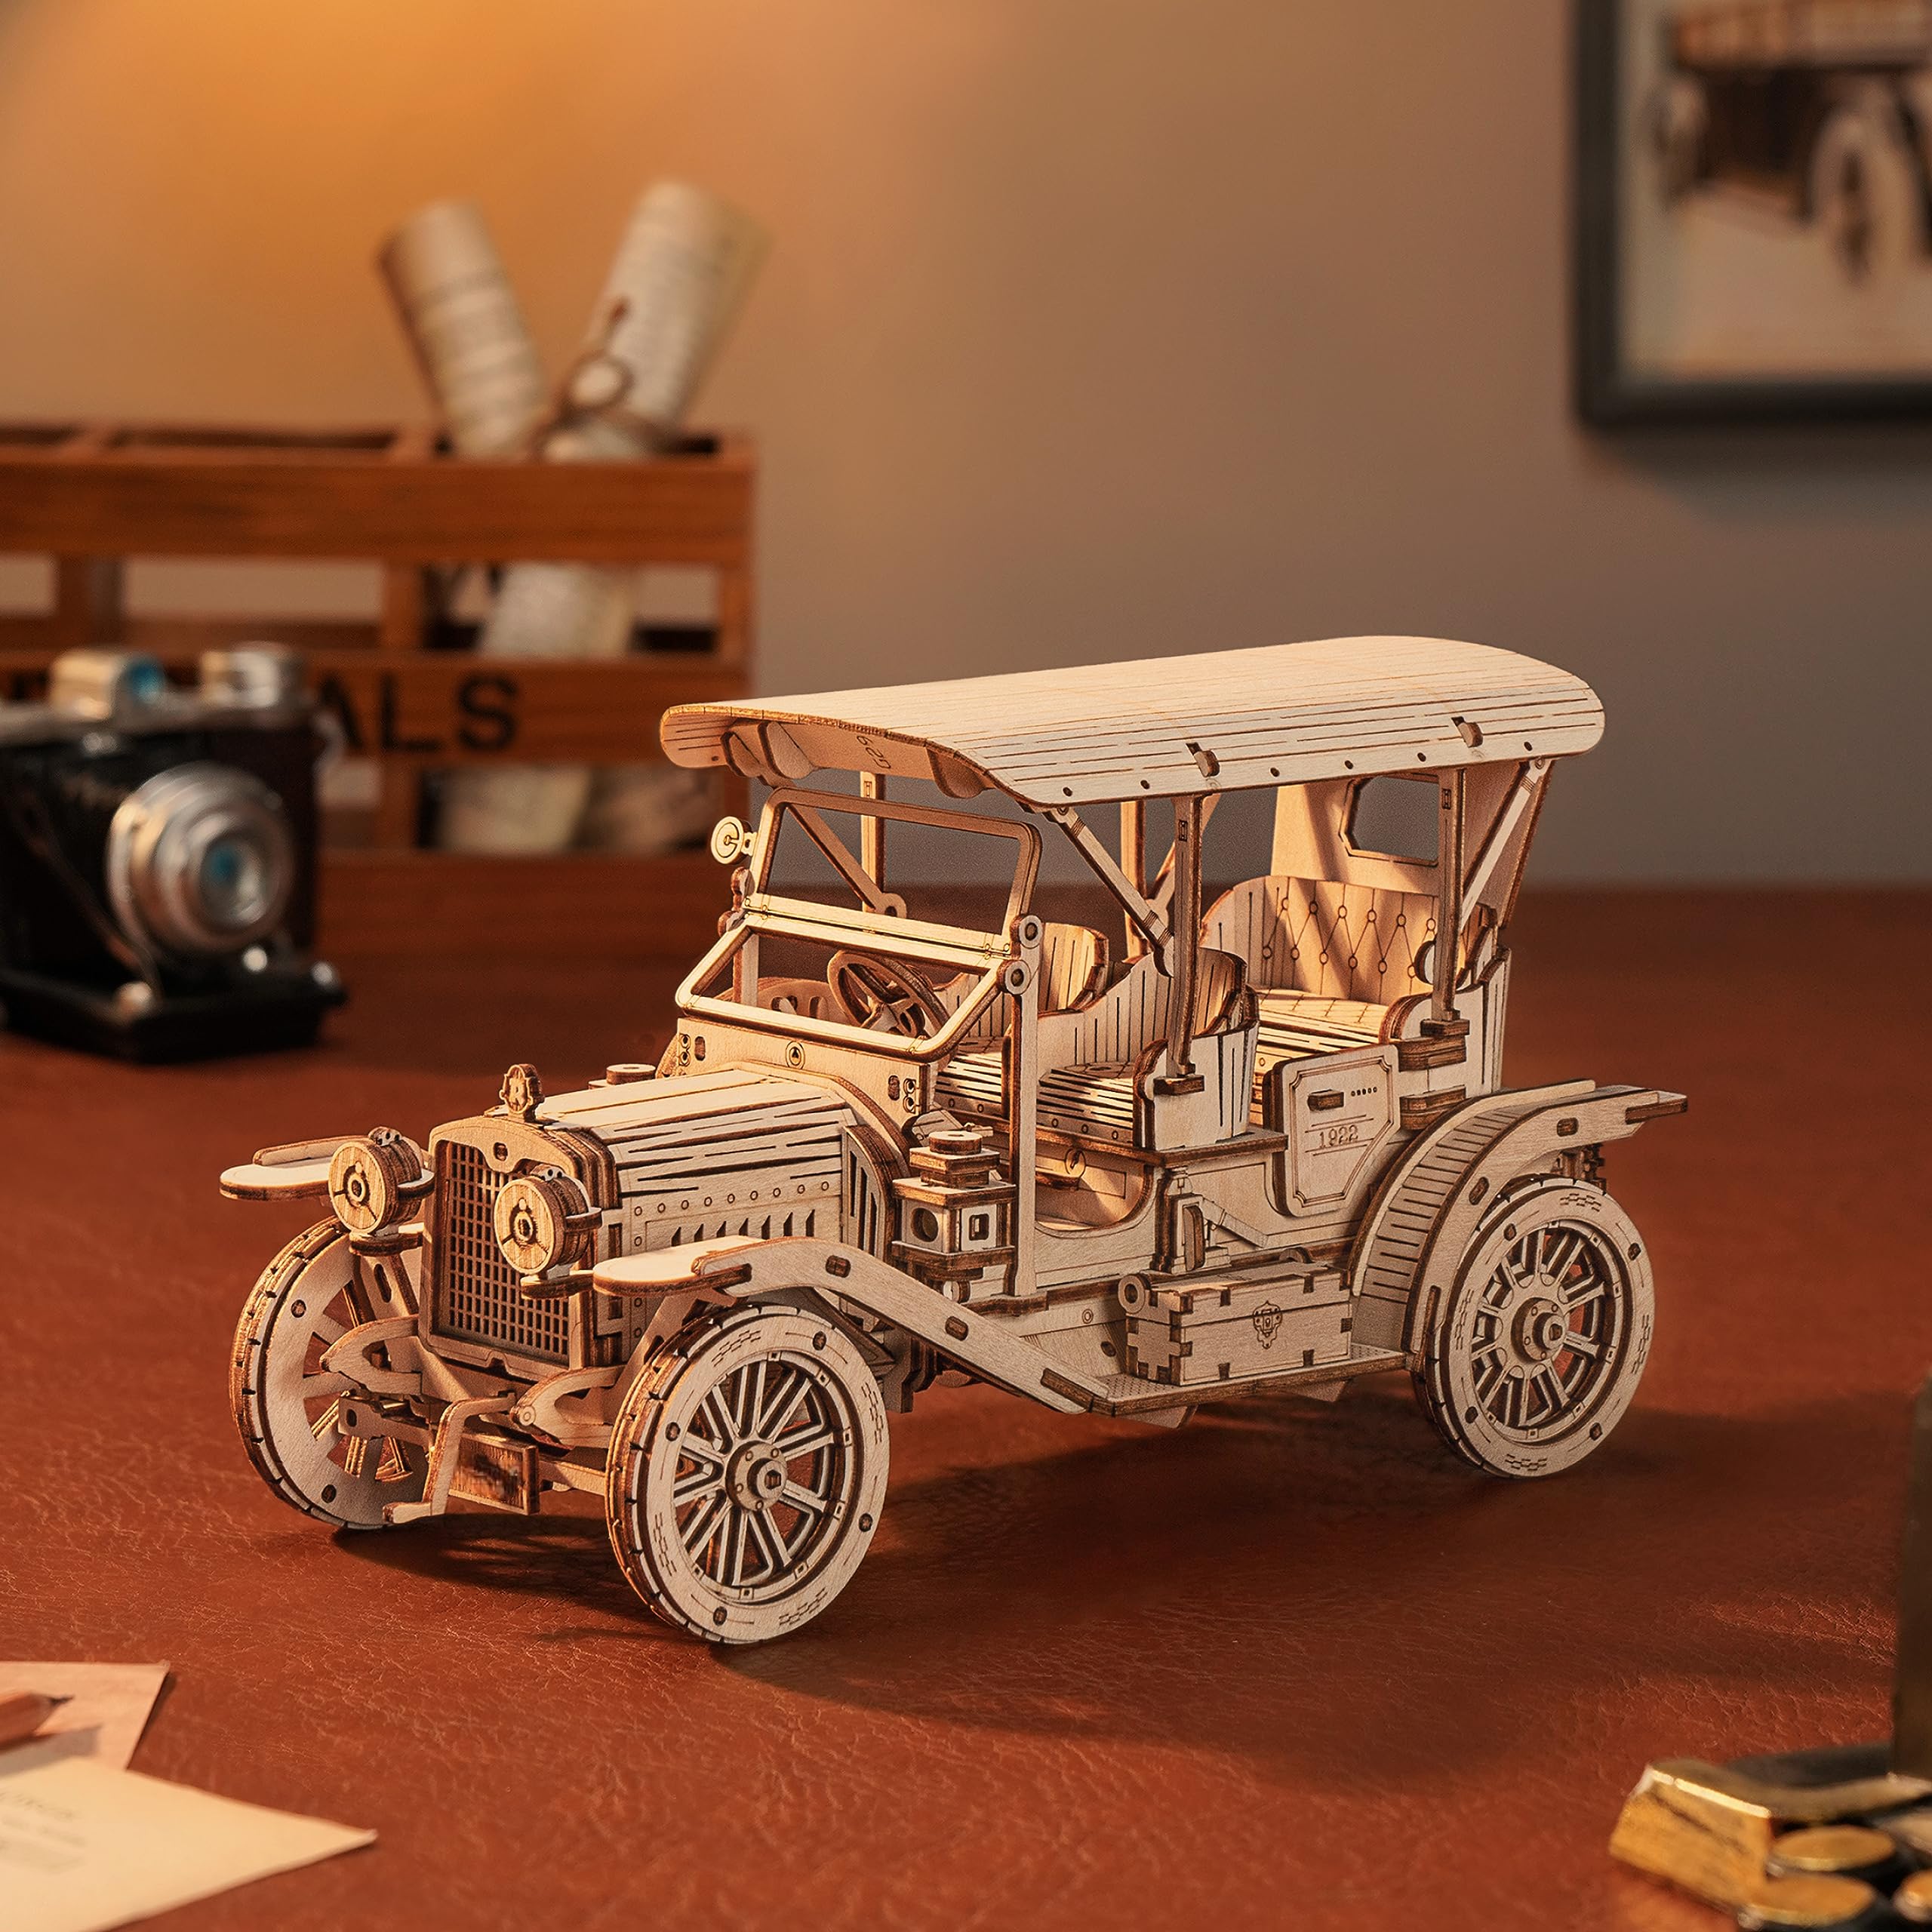 ROBOTIME Vintage Car Wooden 3D Puzzle $15 + Free Shipping w/ Prime or orders $35+